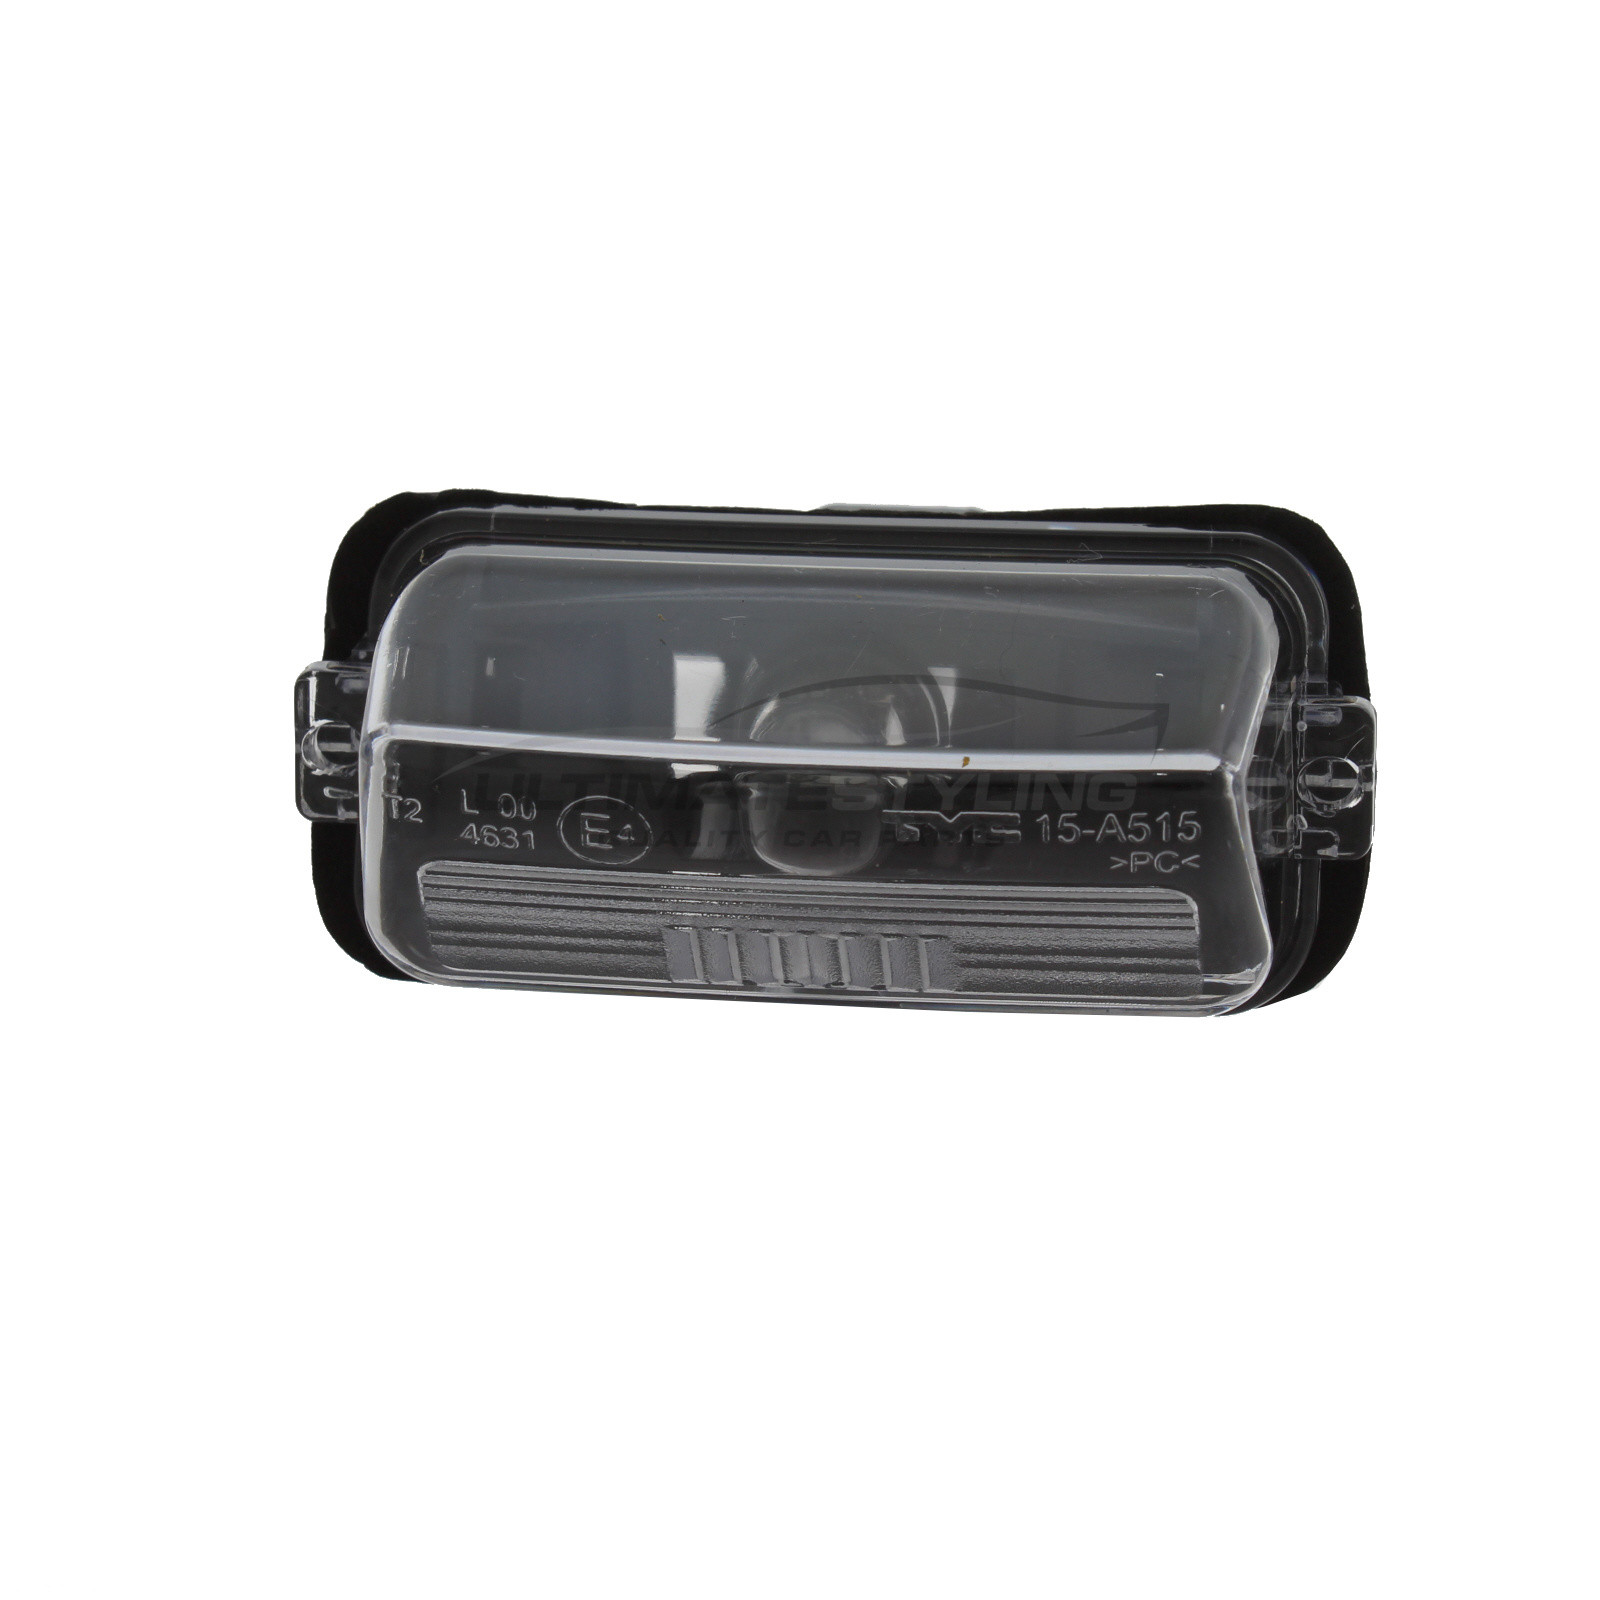 Toyota Auris / Avensis / Verso-S / Yaris Rear Number Plate Light - Universal (LH or RH)